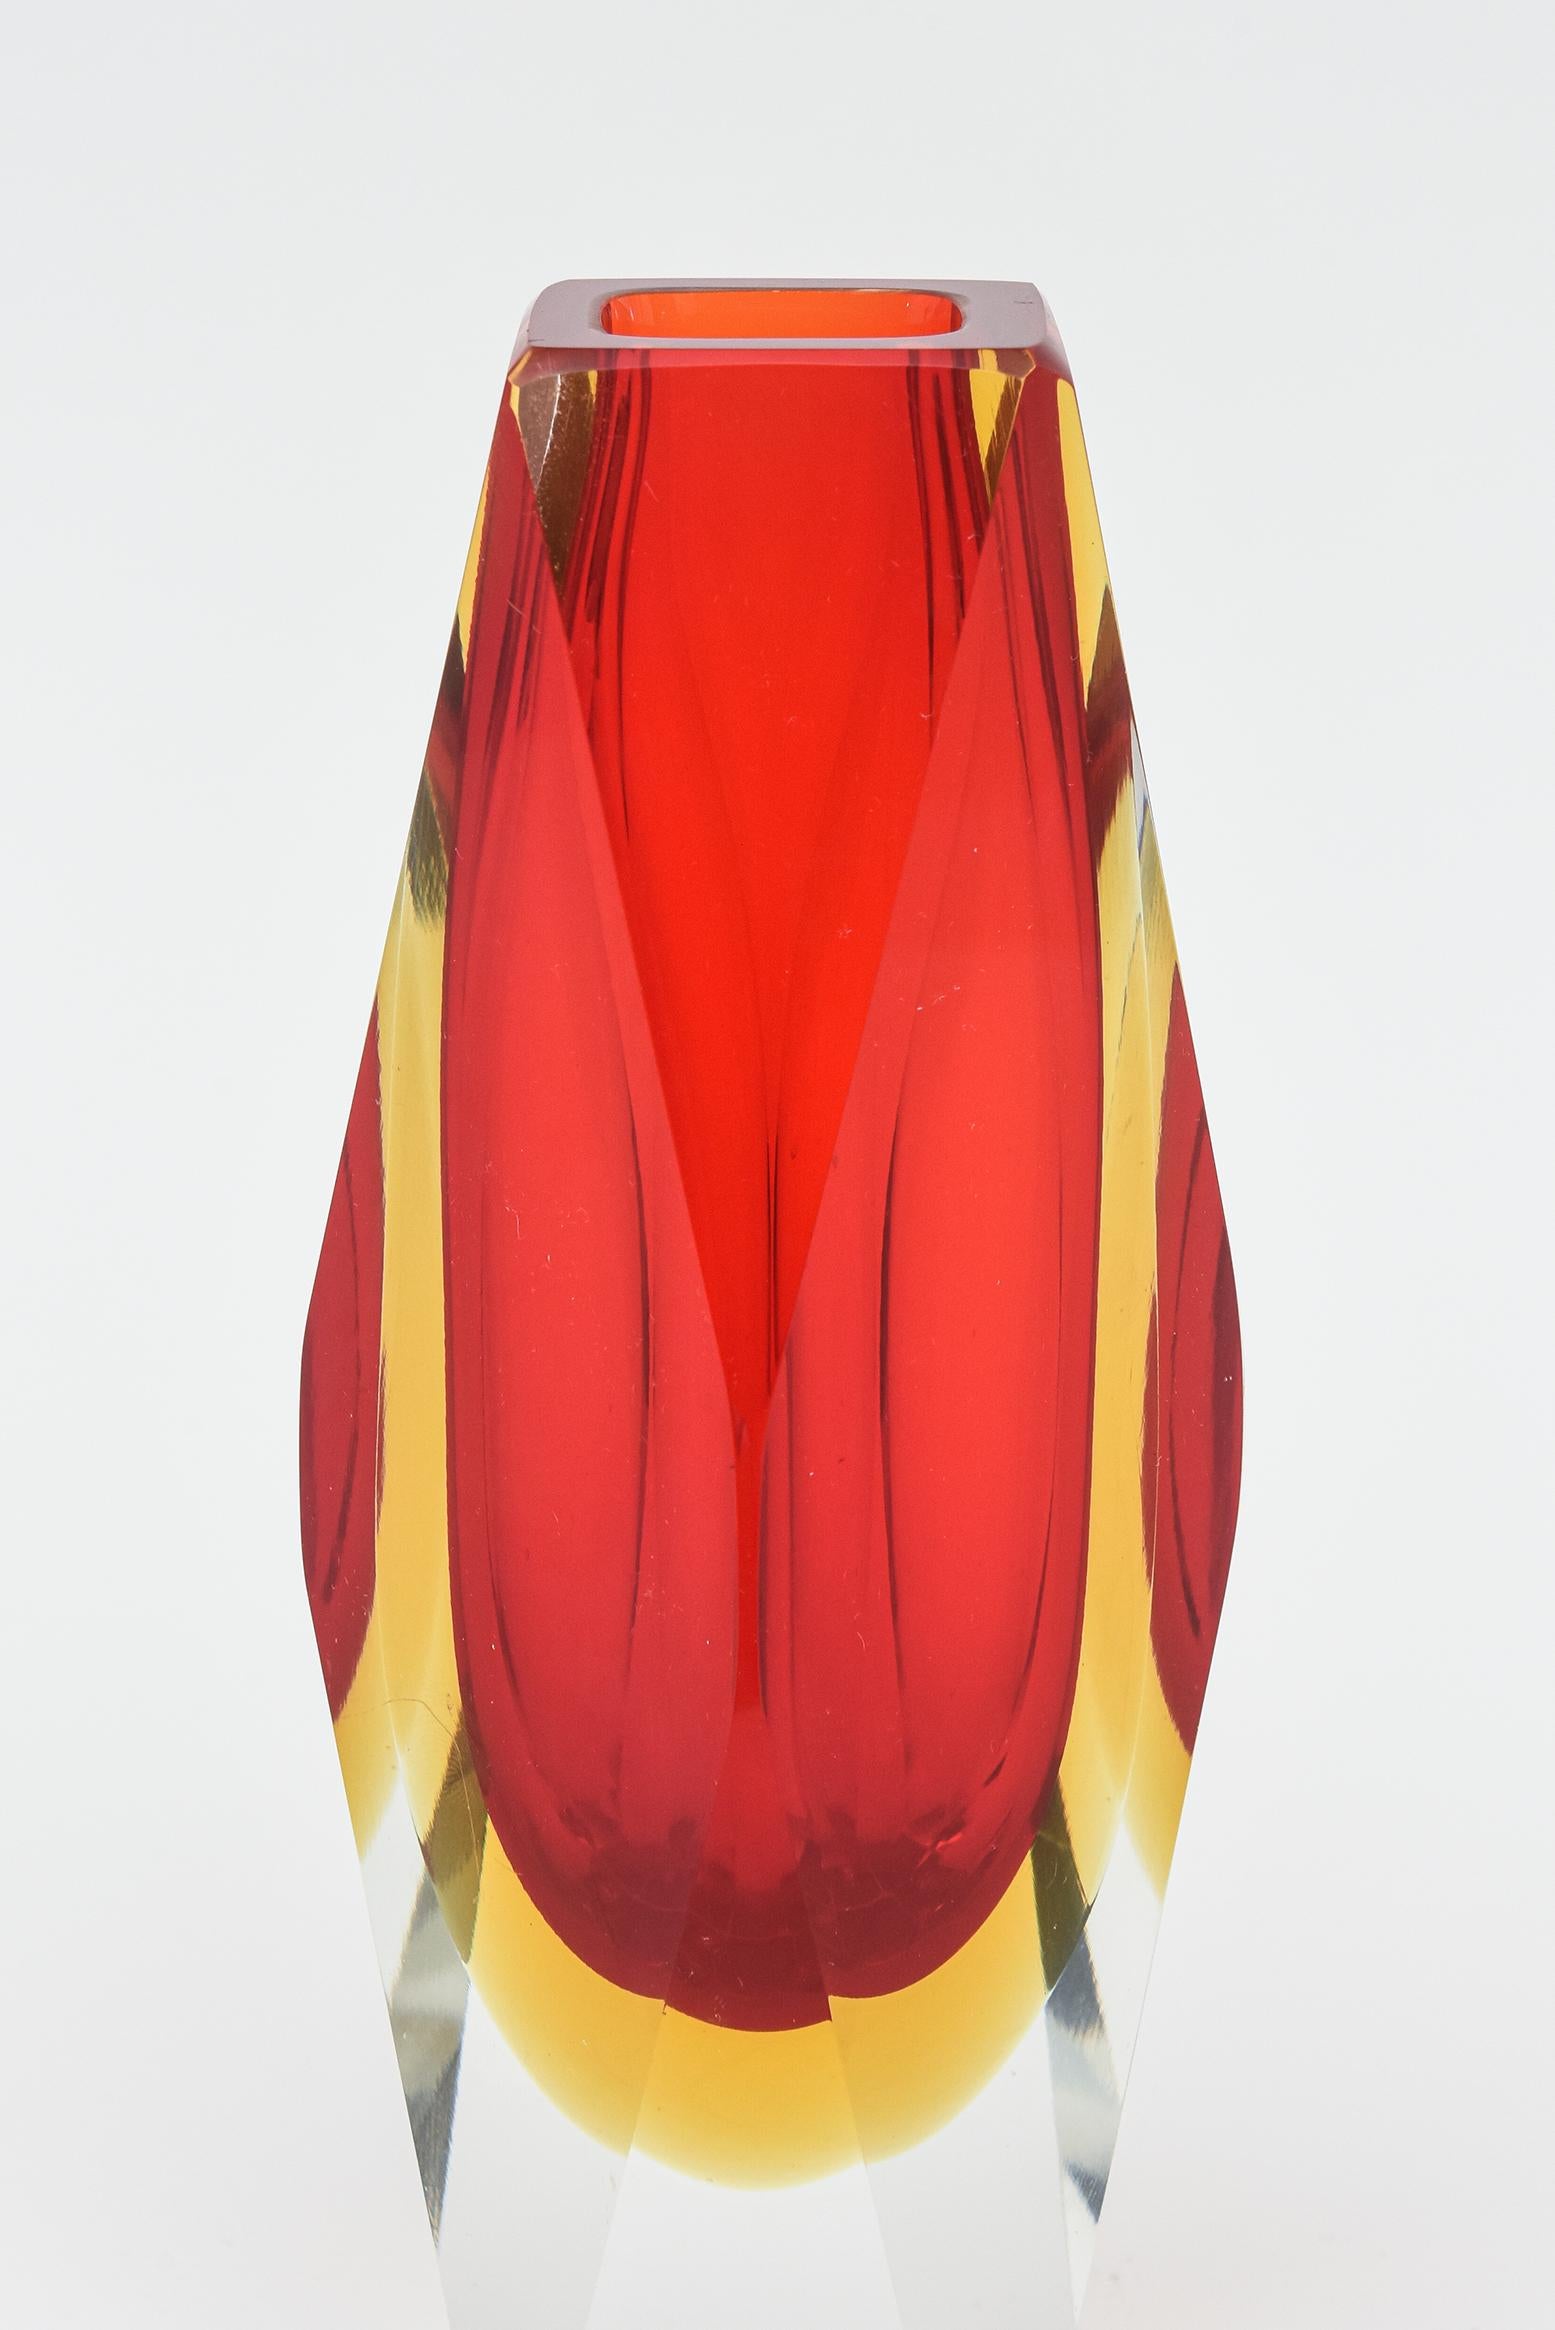 Blown Glass Mandruzzato Vintage Murano Red and Yellow Sommerso Faceted Glass Vase Italian For Sale